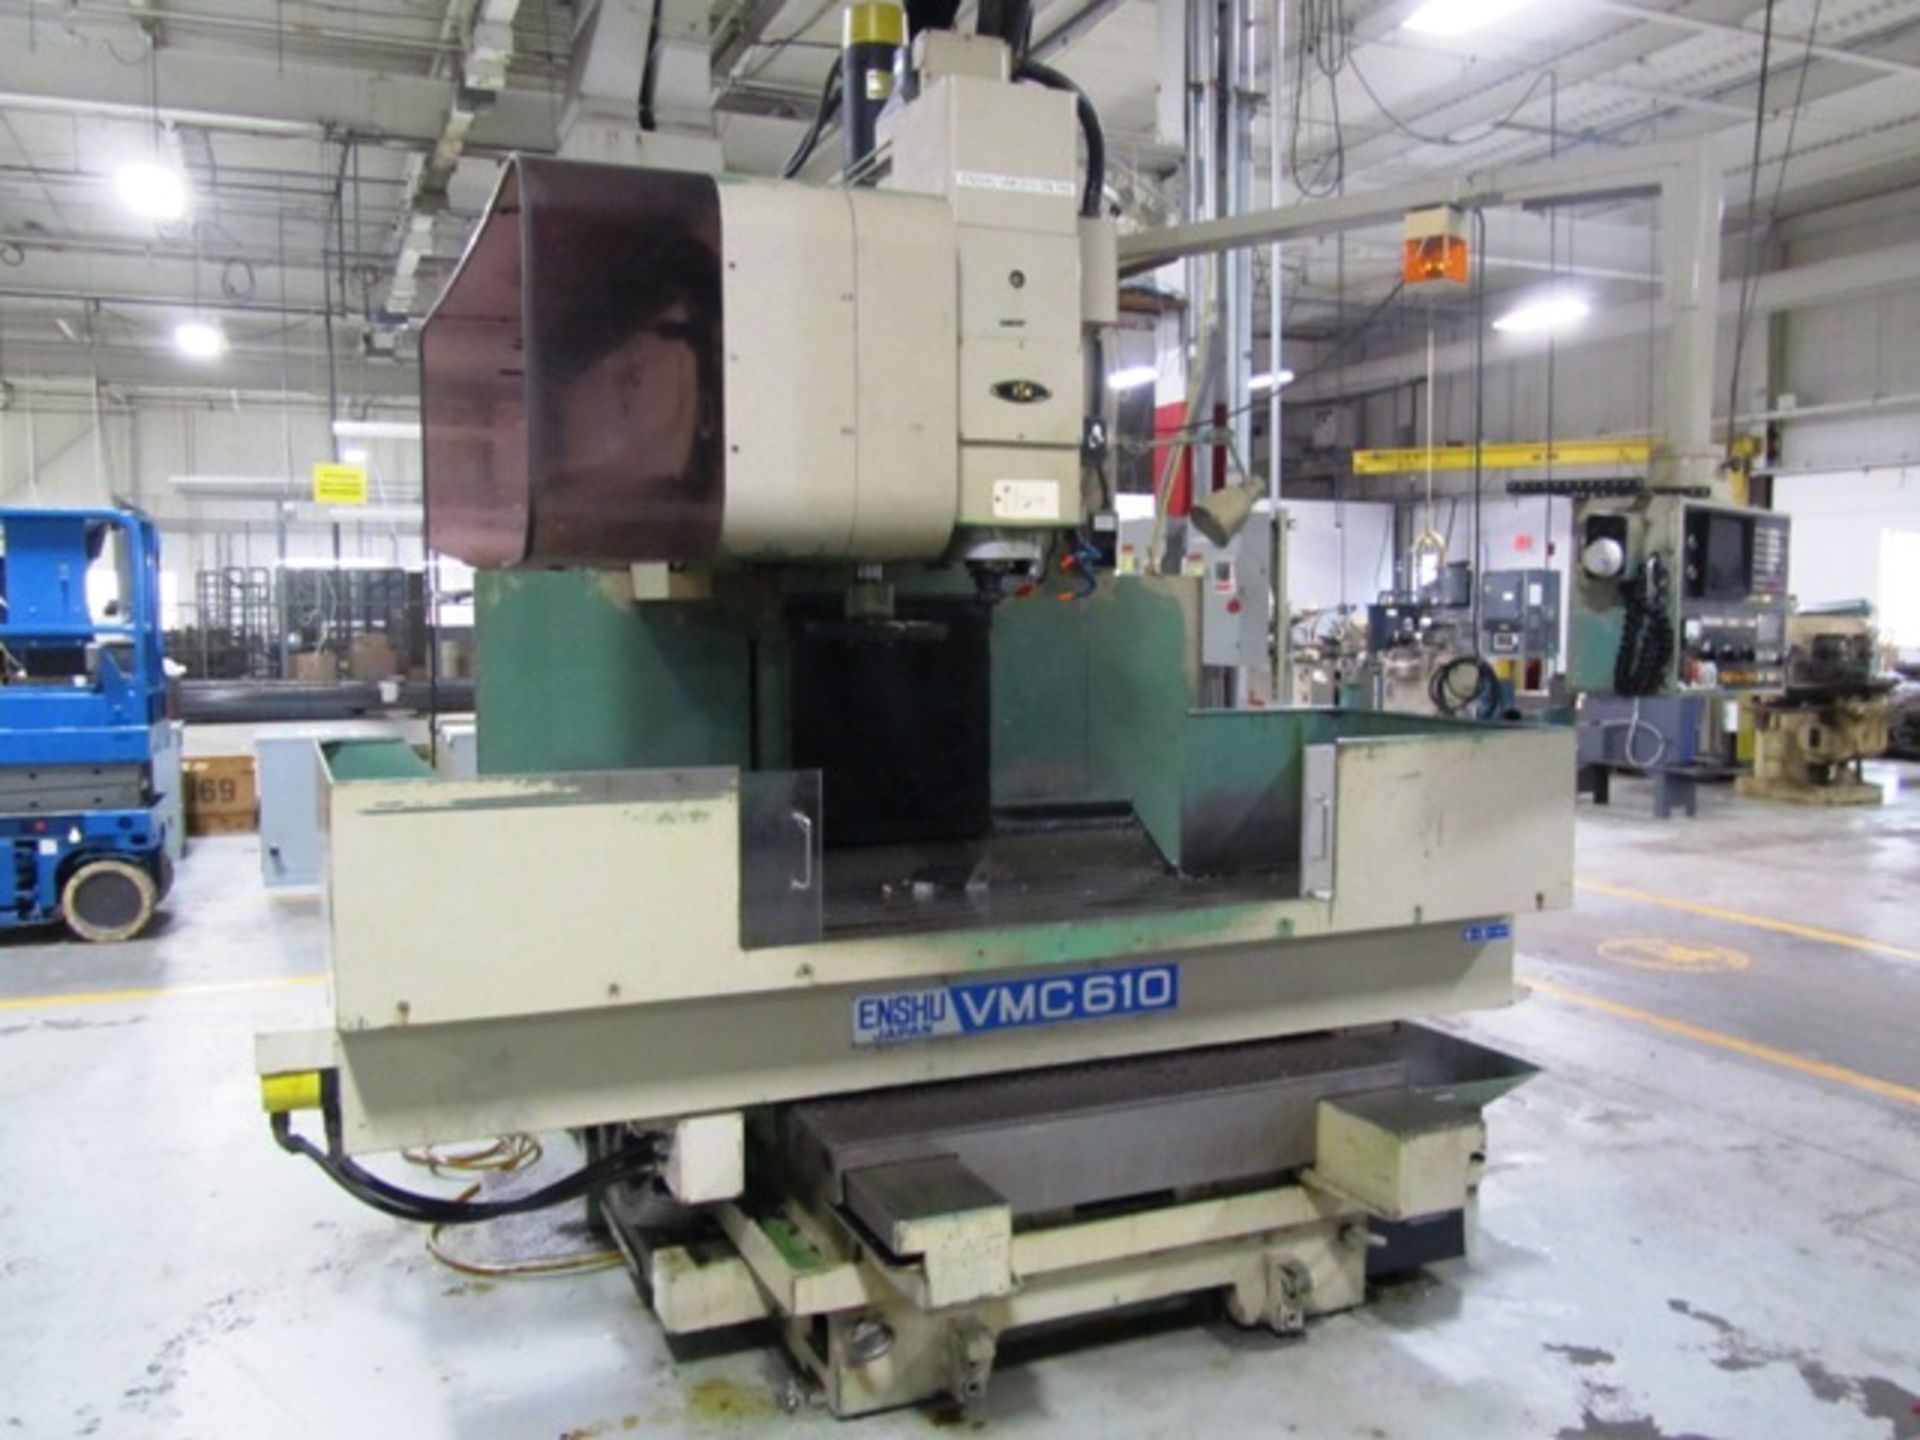 Enshu Model VMC610 CNC Vertical Machining Center with #50 Taper Spindle Speeds to Approx 3500 RPM, - Image 3 of 4